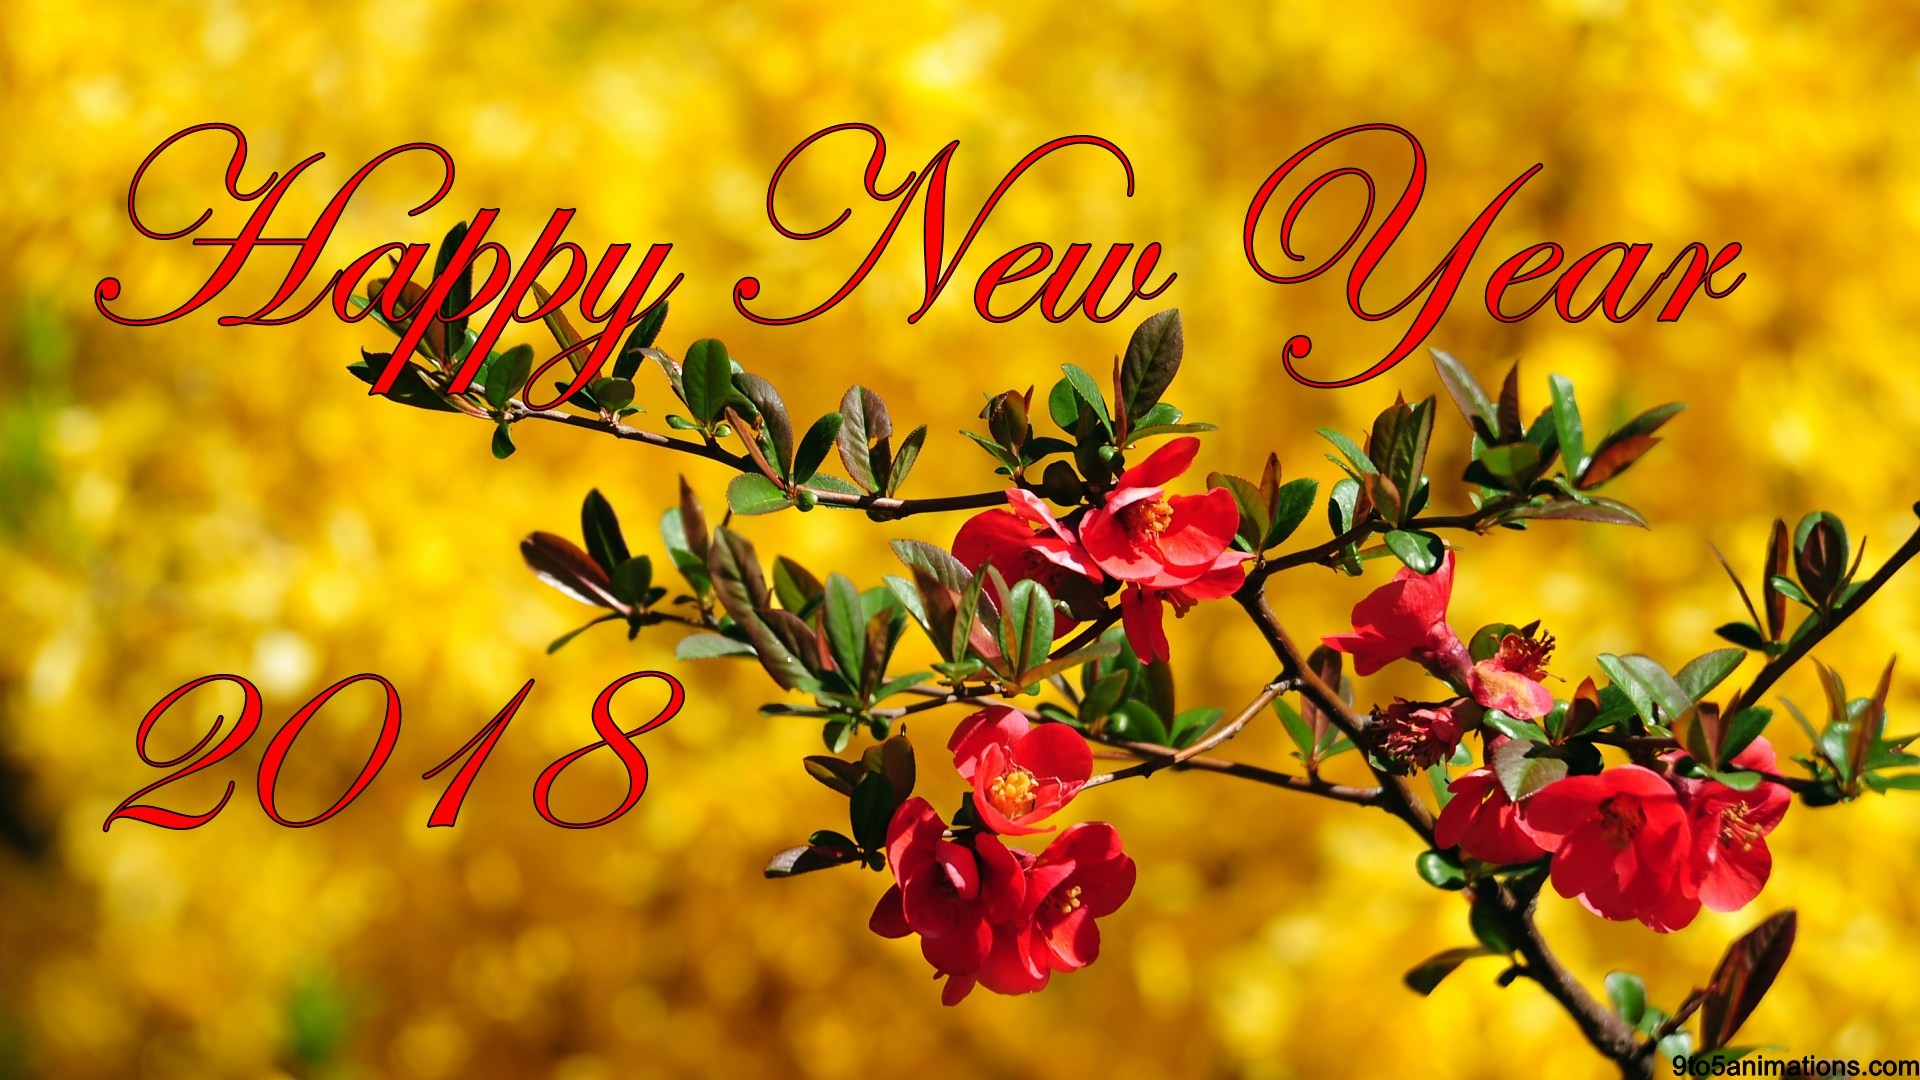 1920x1080 New year 2018 nice wallpapers high definition free download